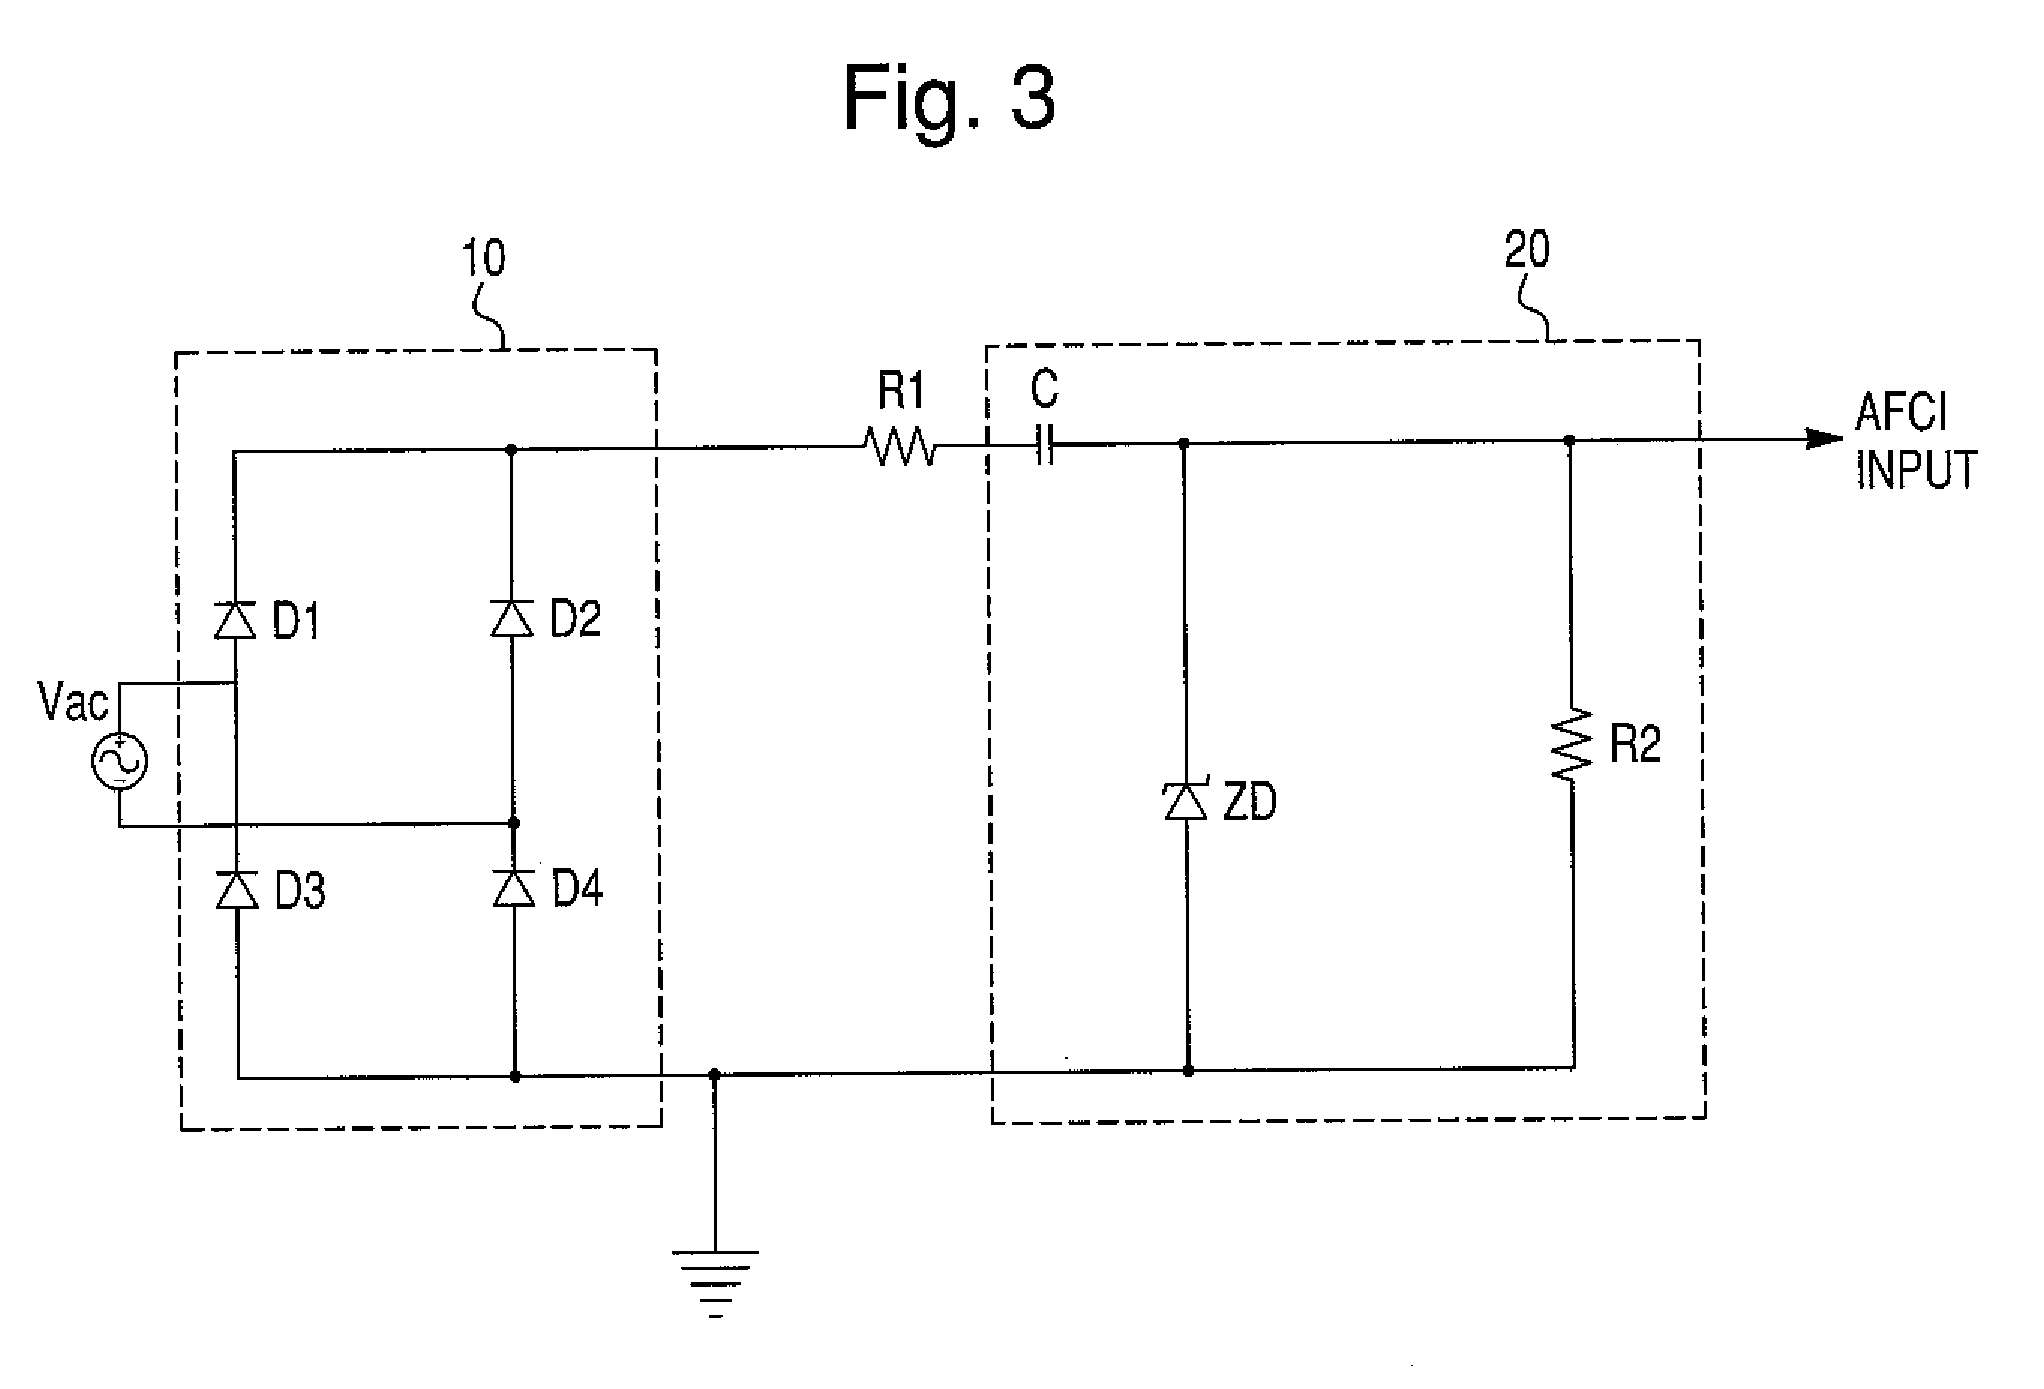 Arc wave generator for testing an arc-fault circuit interrupter